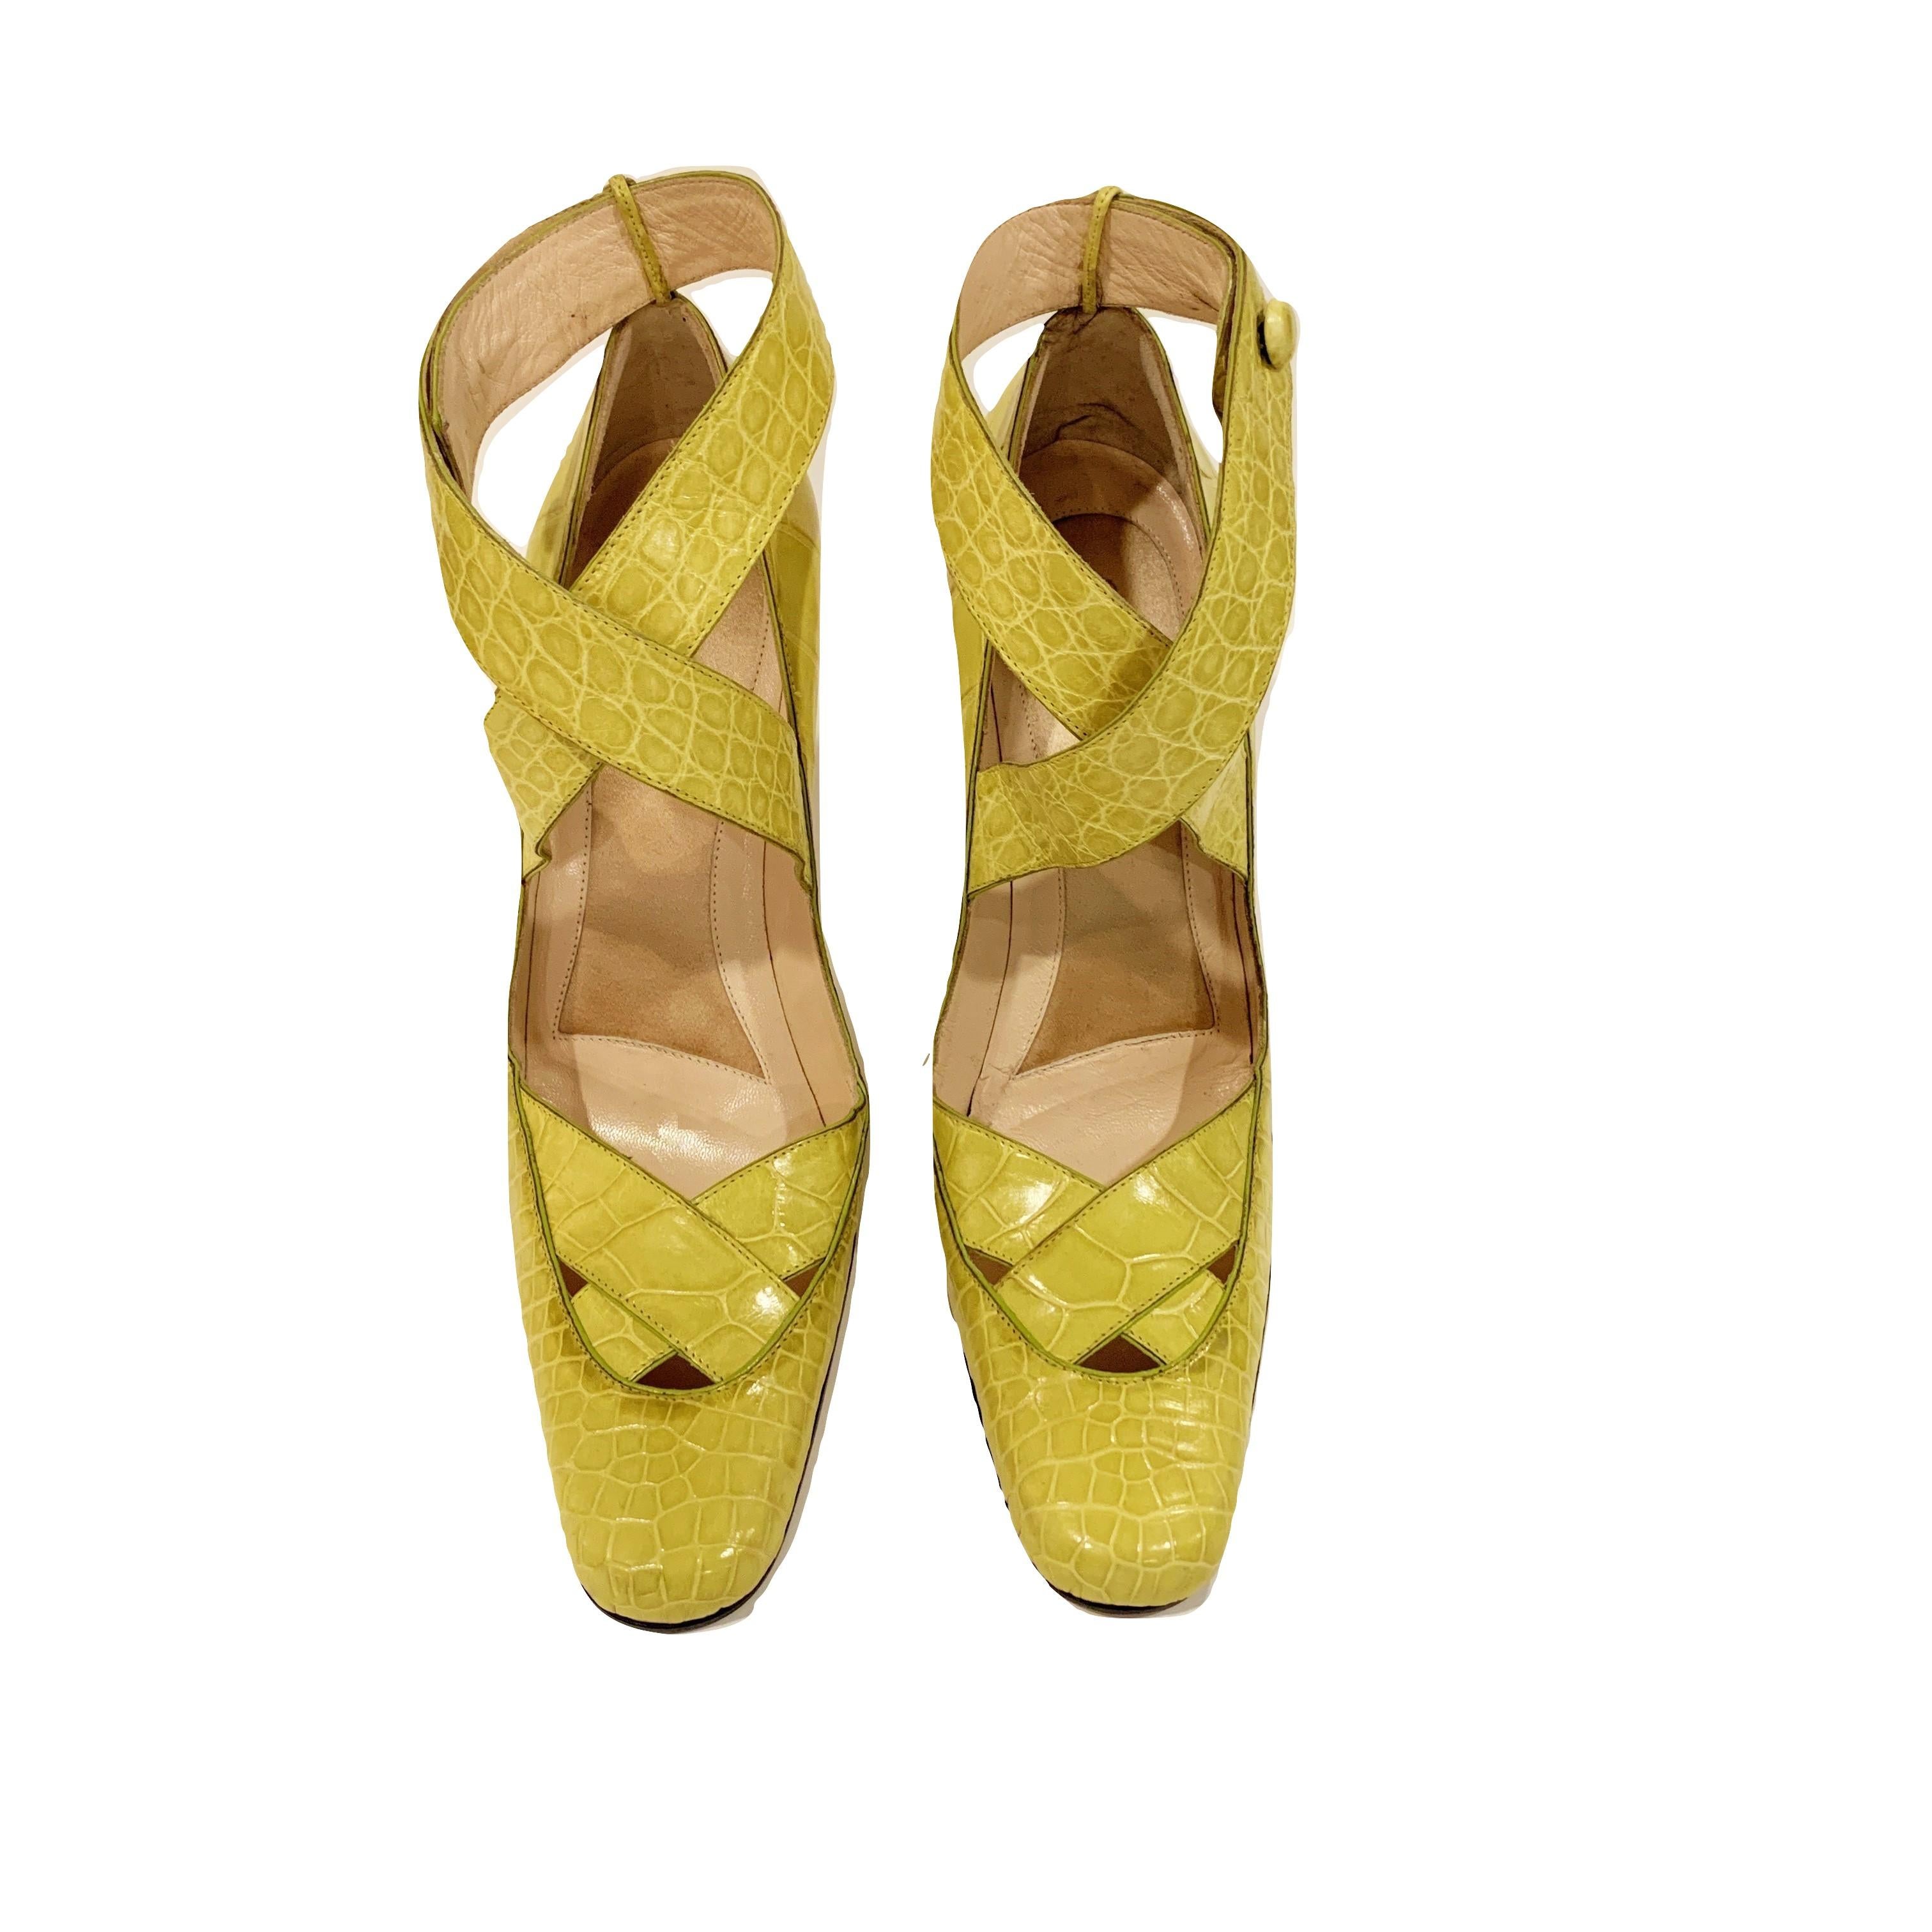 New Tom Ford for Gucci Crocodile Ballerina Heels Pumps in Light Chartreuse Sz 39 9